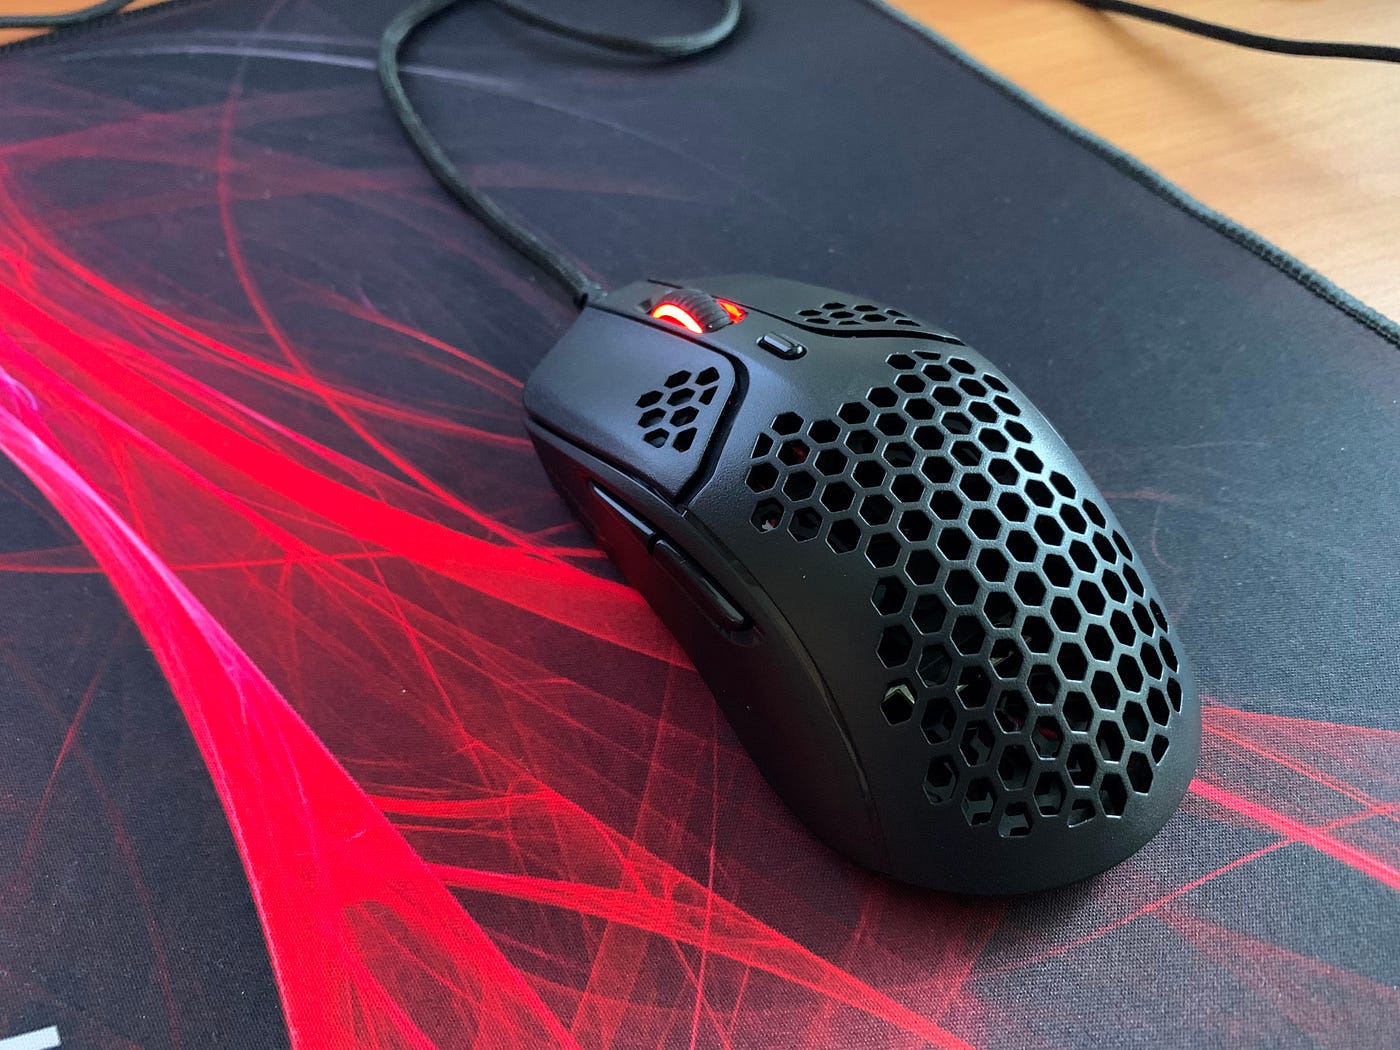 HyperX Pulsefire Haste Gaming Mouse Review, by Alex Rowe